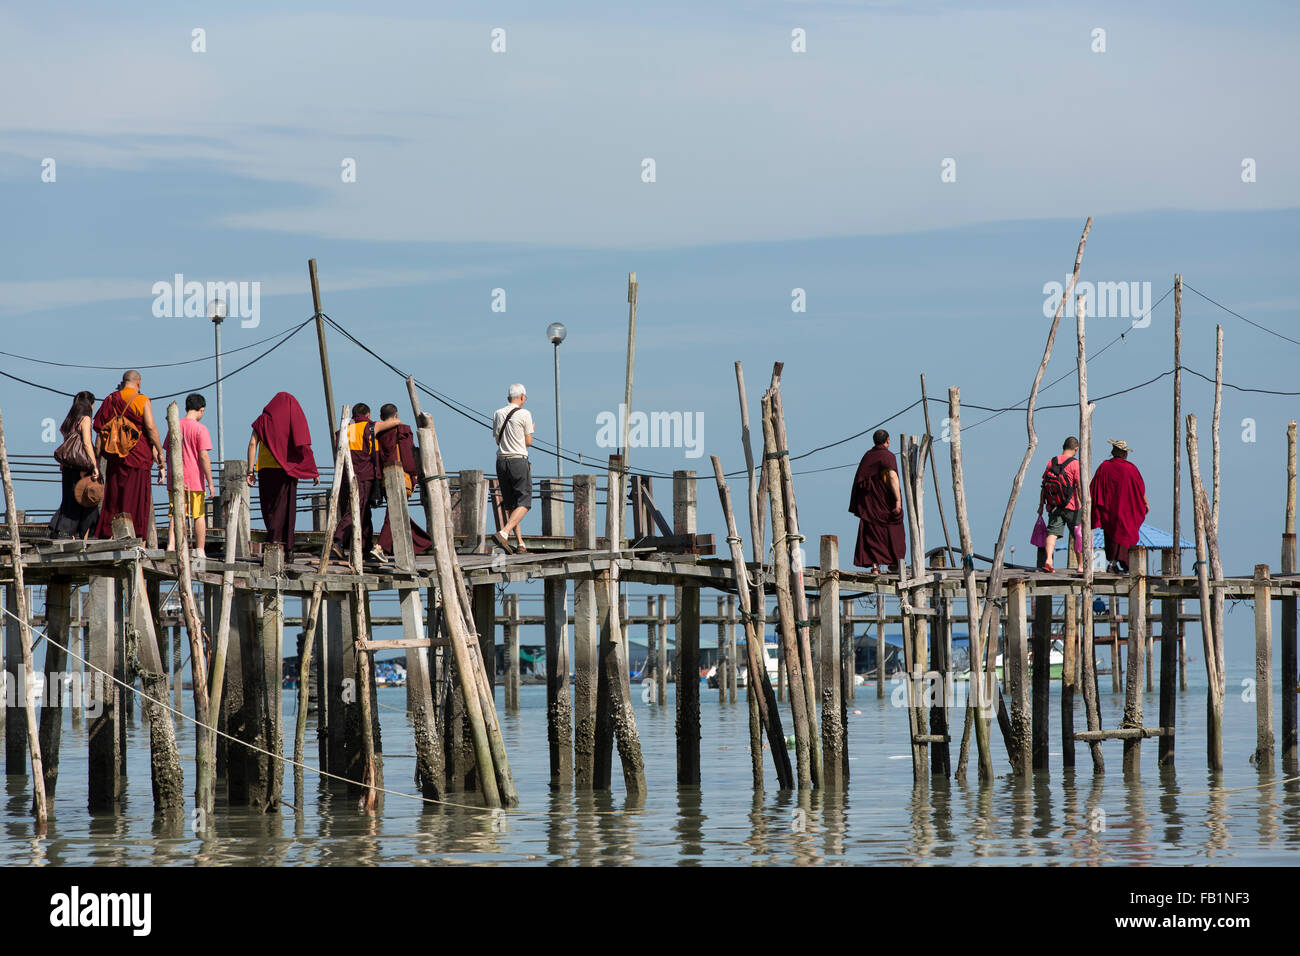 Buddhist pilgrims walking along a wooden jetty at Teluk Bahang Penang to catch a ferry on their way to complete their journey. Stock Photo